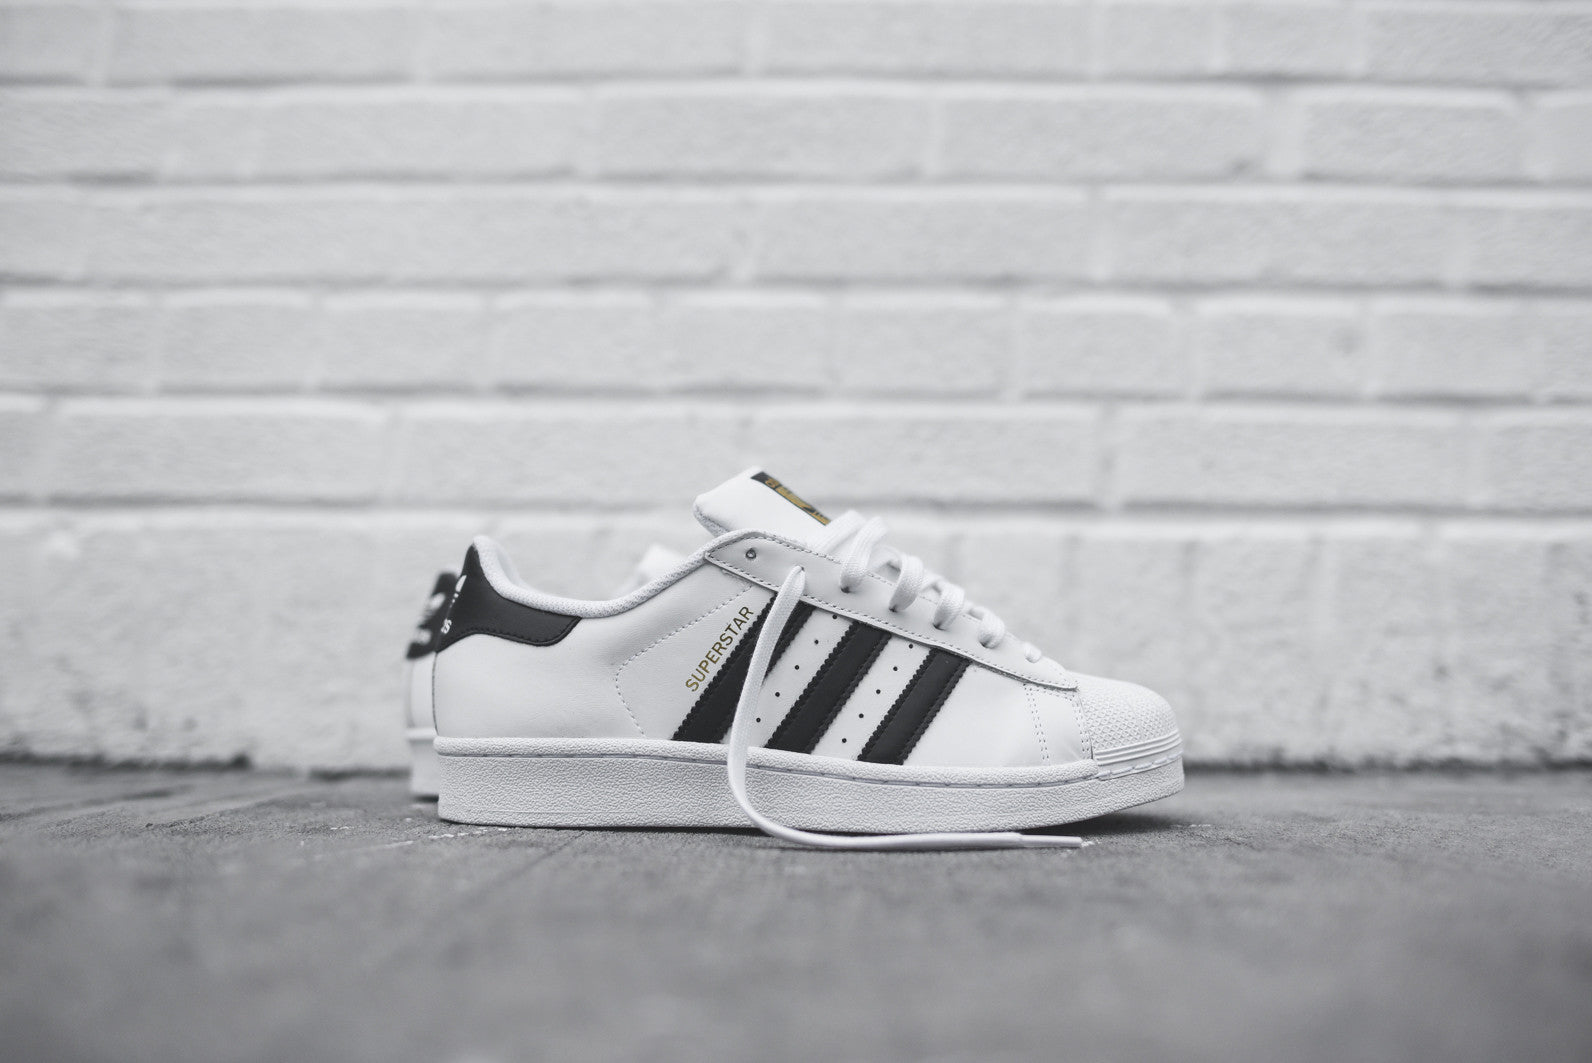 adidas Originals Women's Superstar Up W White and Black Leather 